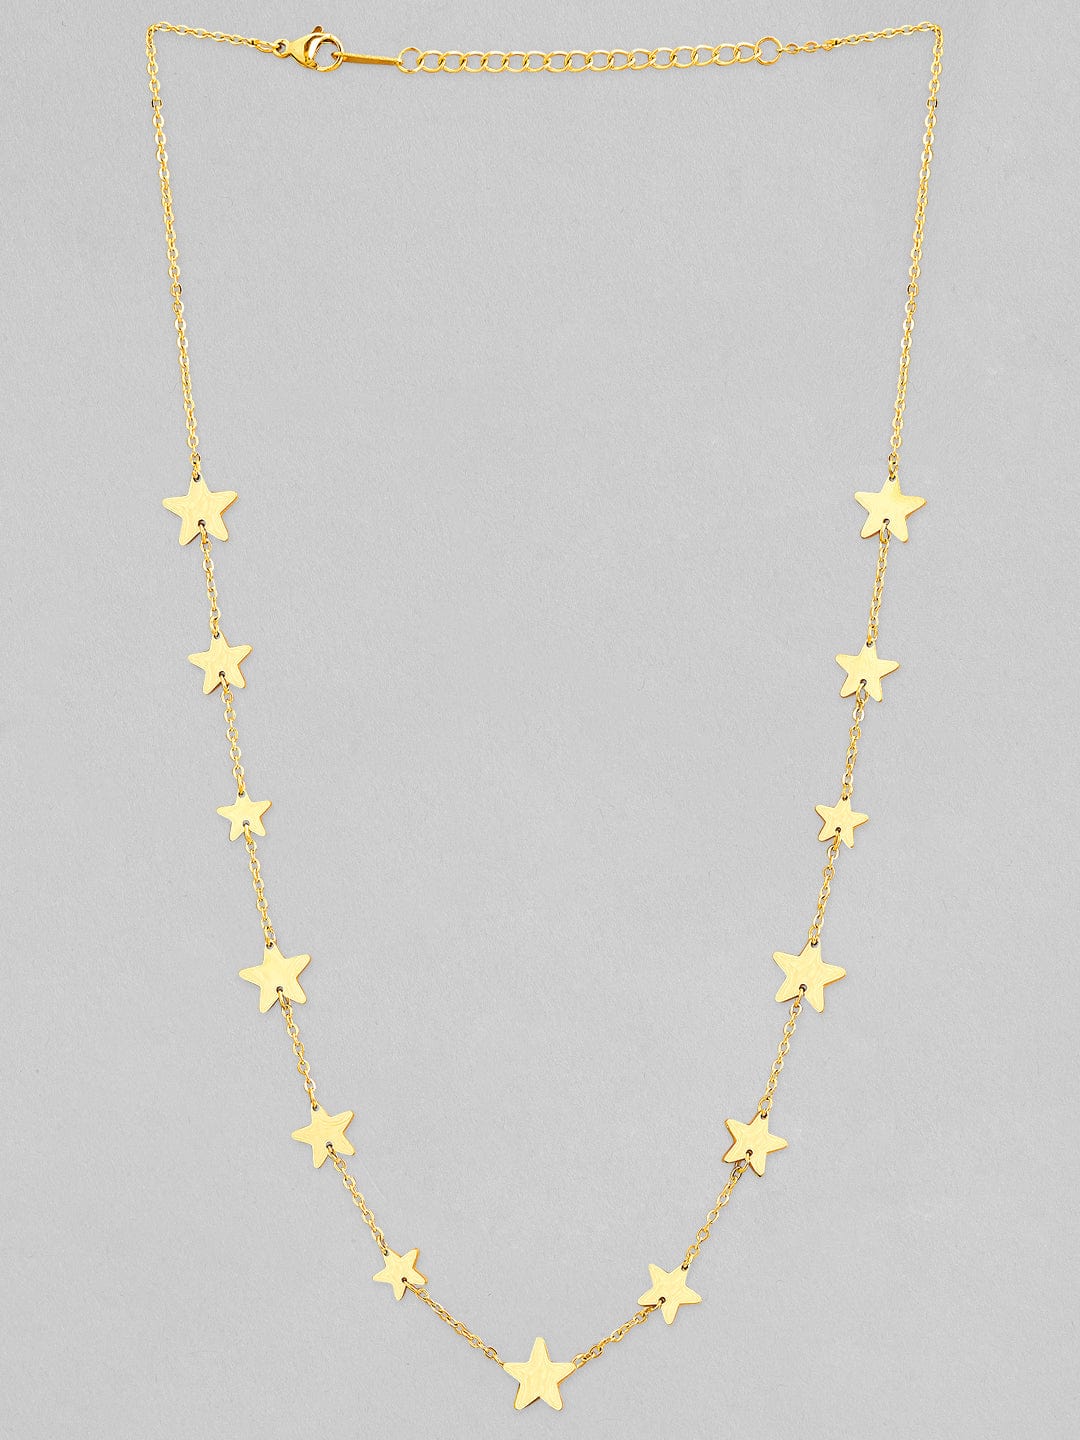 Rubans Voguish 18K Gold Plated Stainless Steel Waterproof Chain With Stars Details. Chain & Necklaces